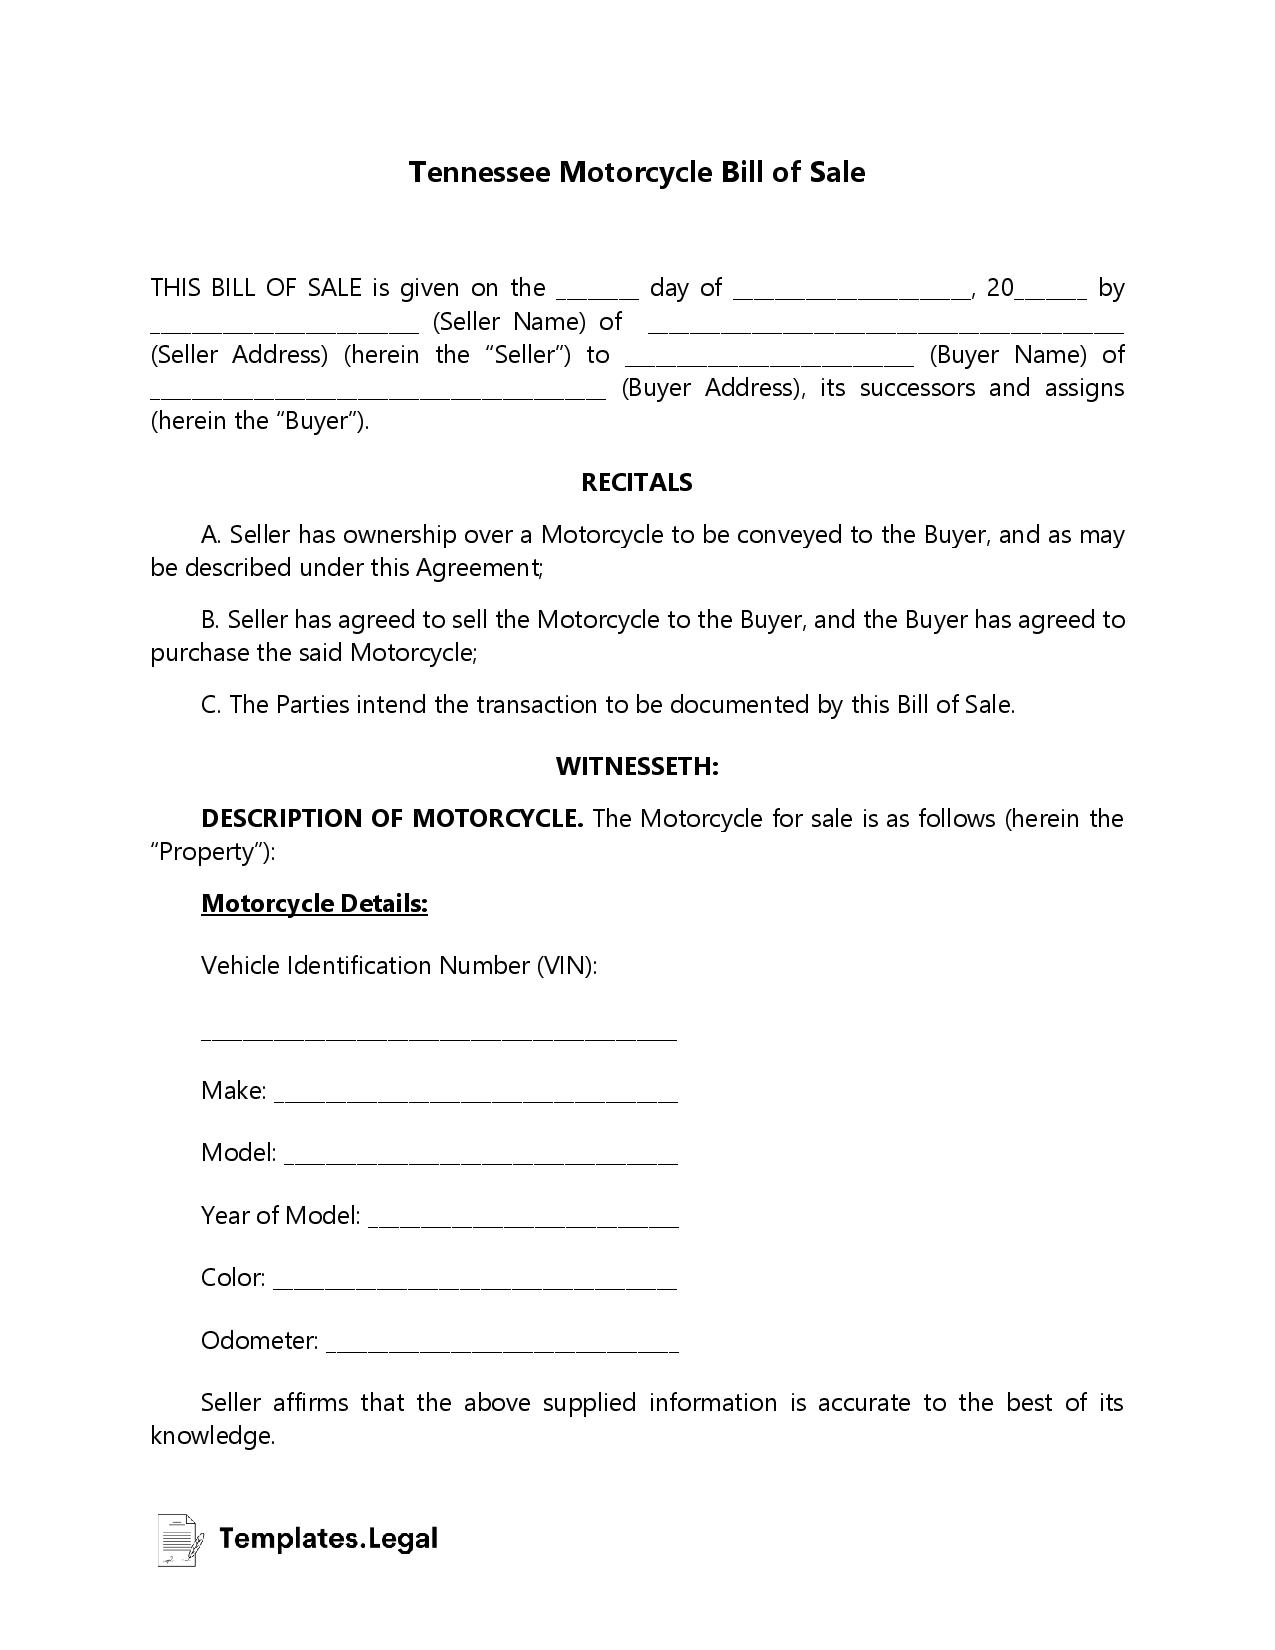 Tennessee Motorcycle Bill of Sale - Templates.Legal